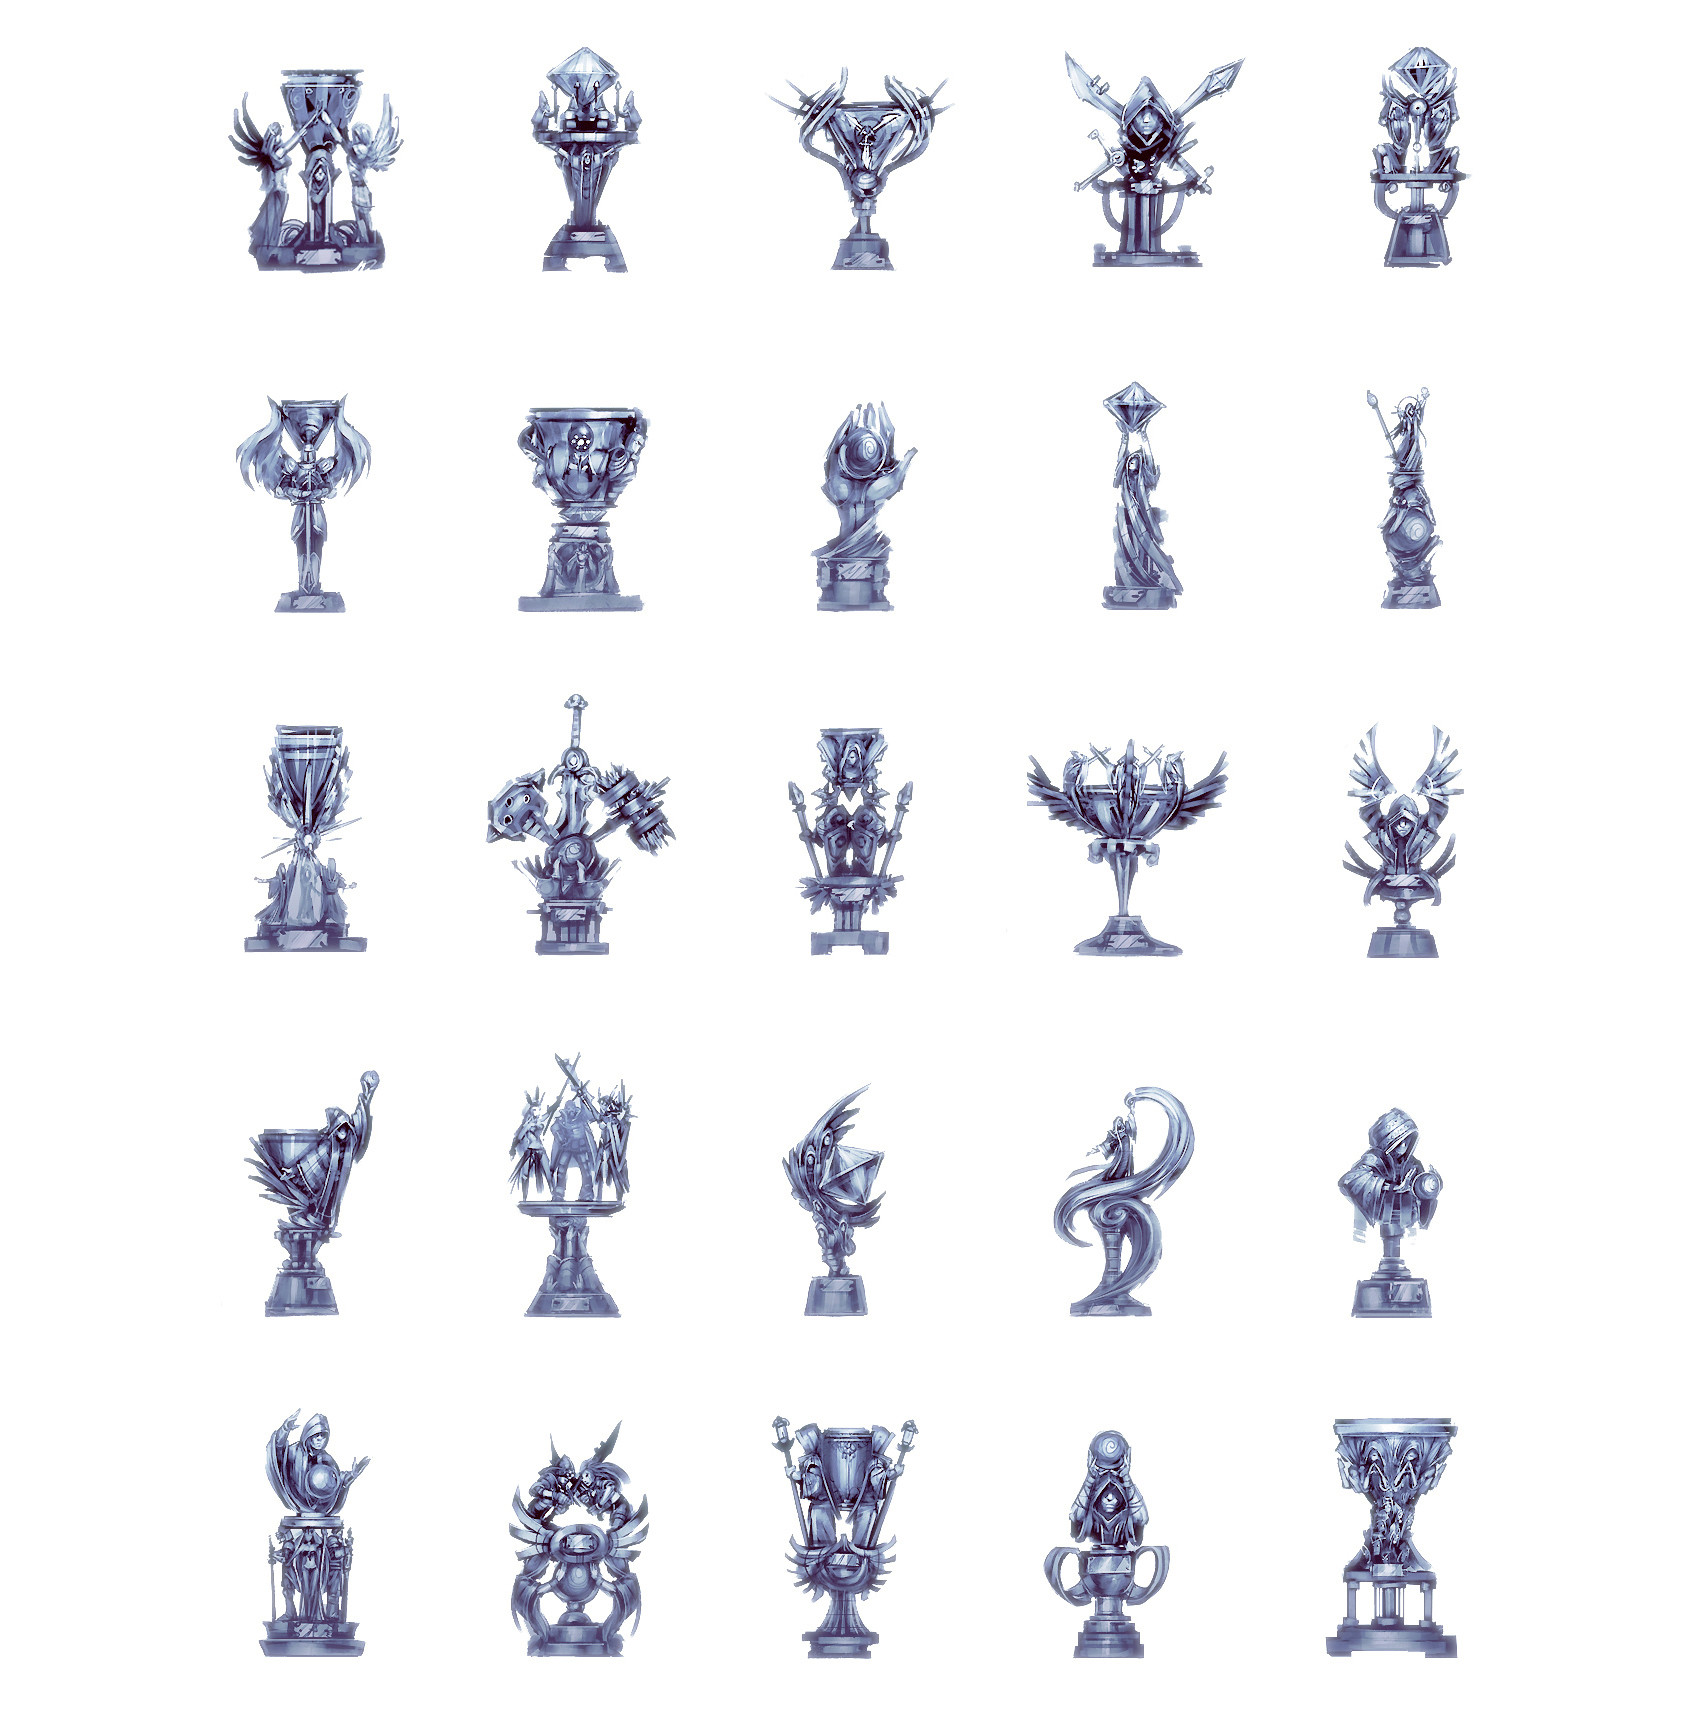 LJL 2022 Trophy summoner icons in League of Legends